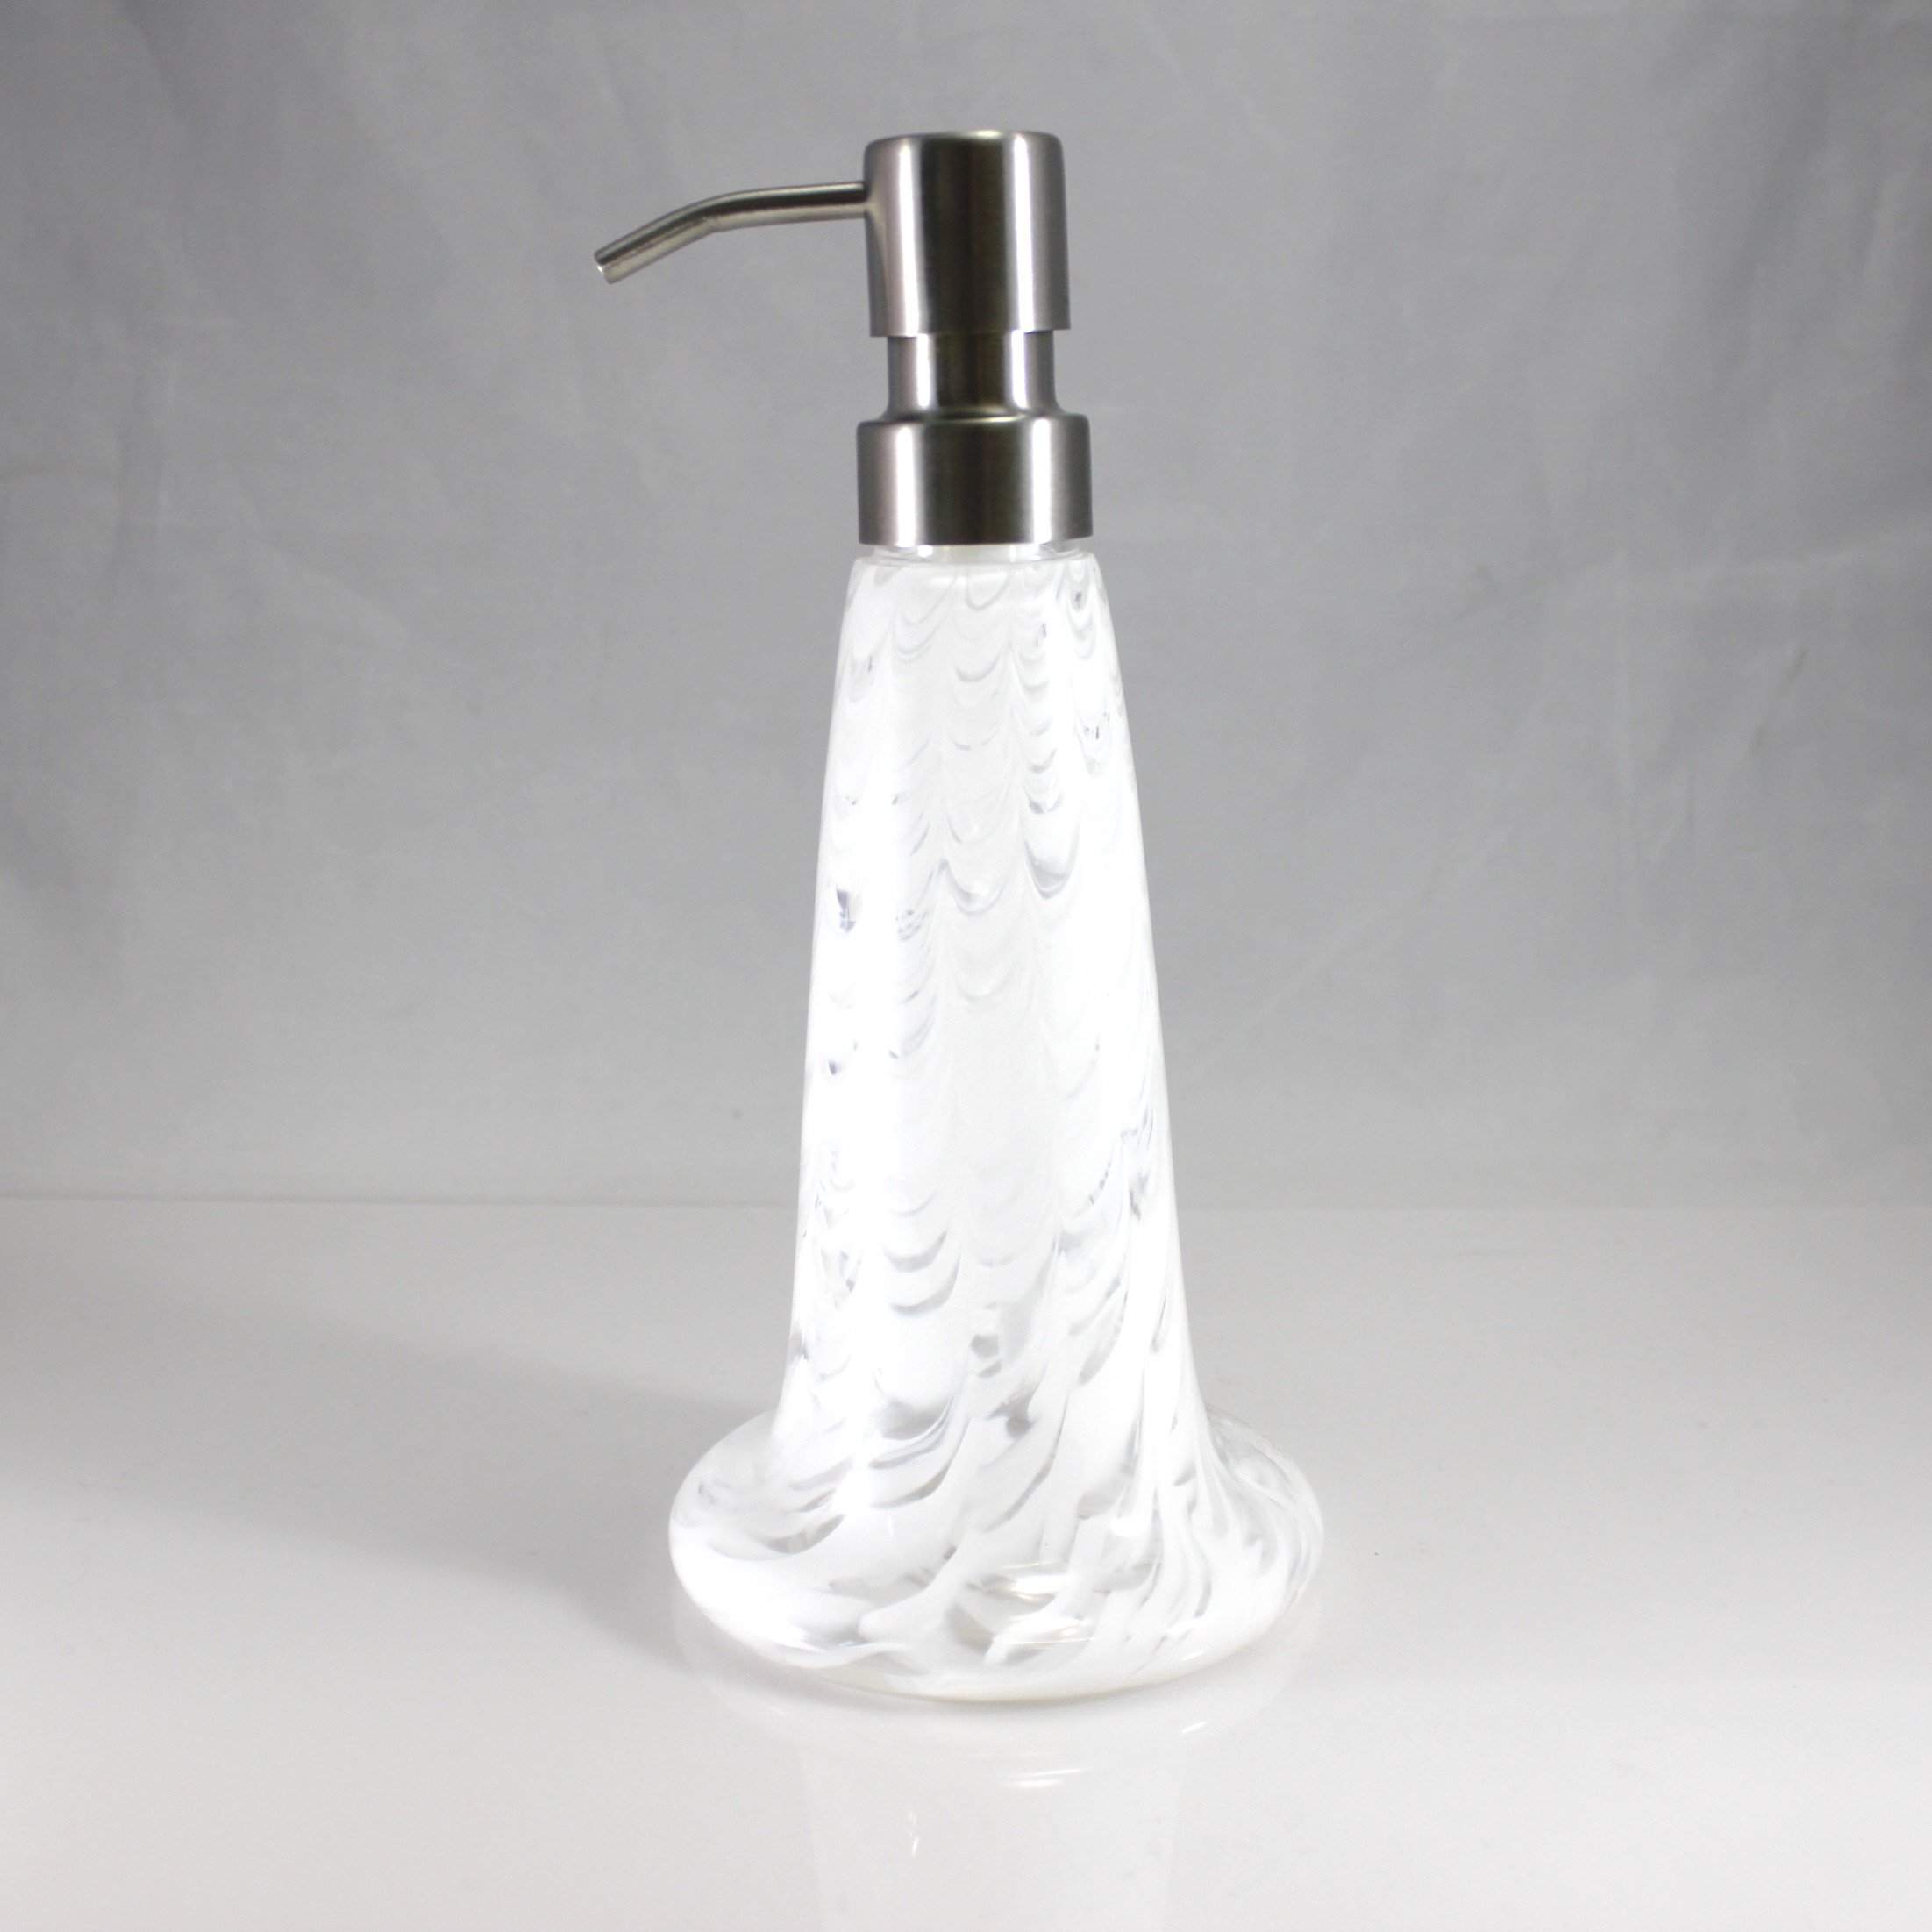 Handblown Glass Soap Dispenser Available in Many Colors – Mirador Glass